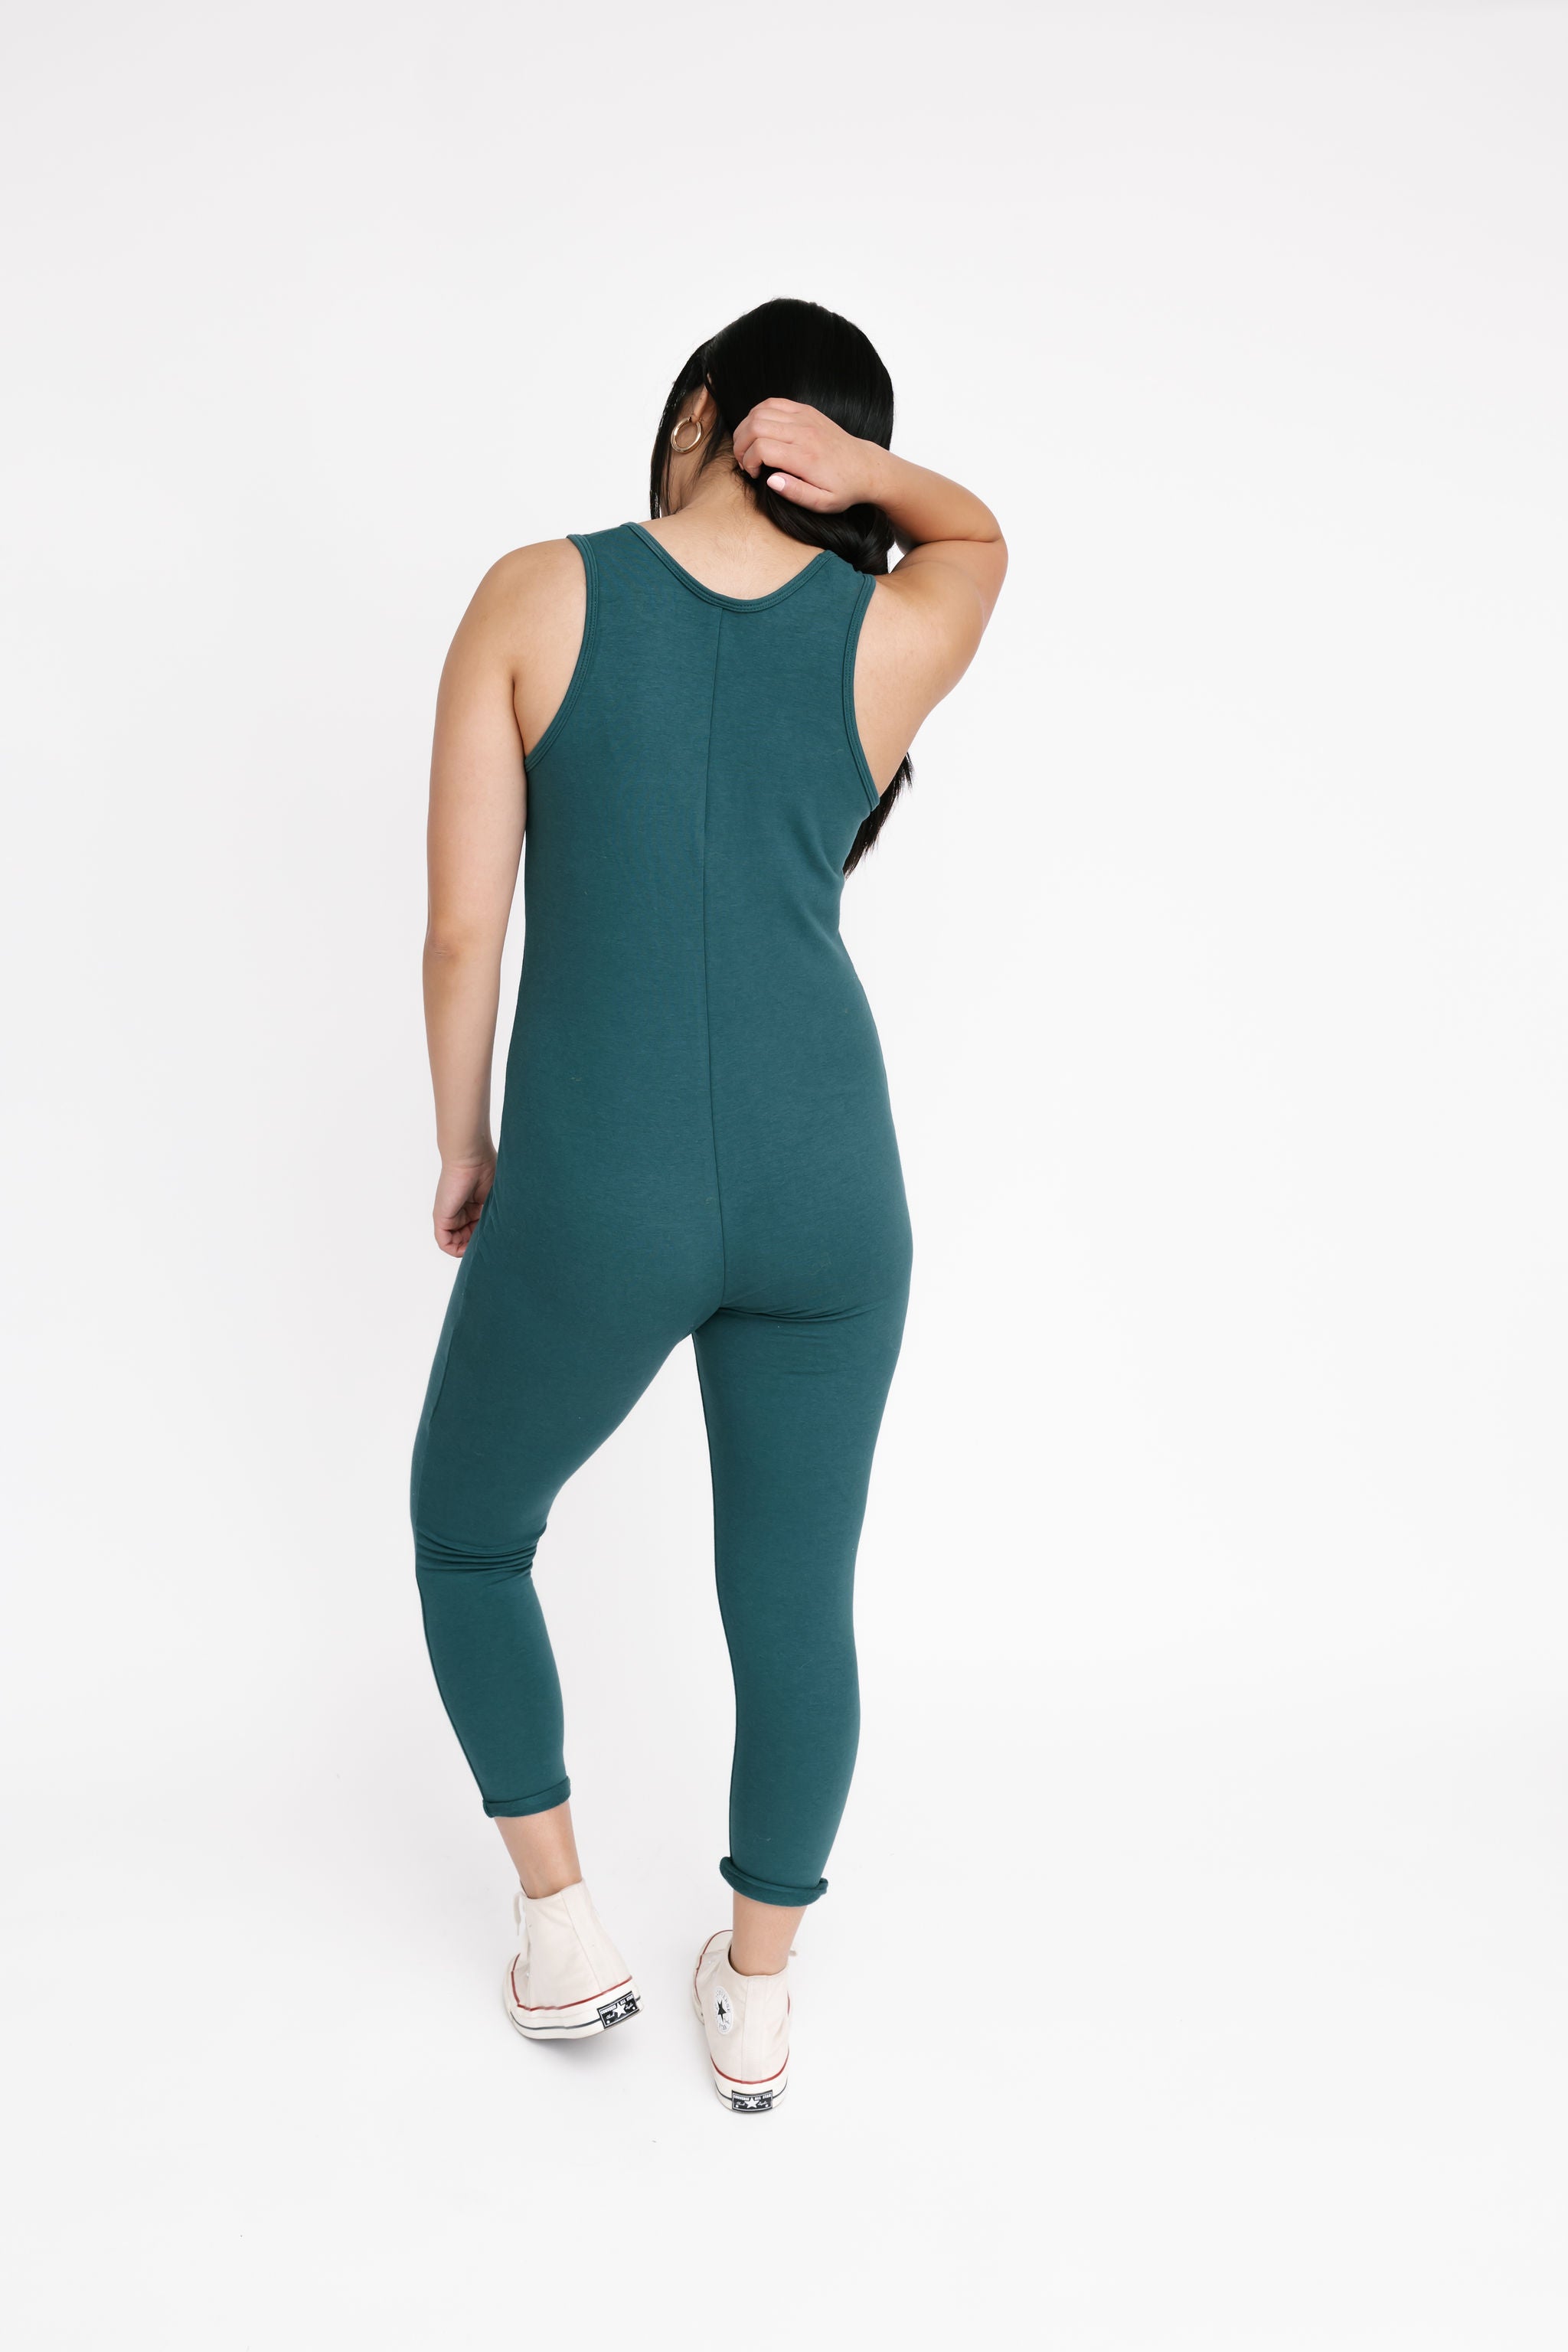 Saturday Romper (Terry) in Forest Green